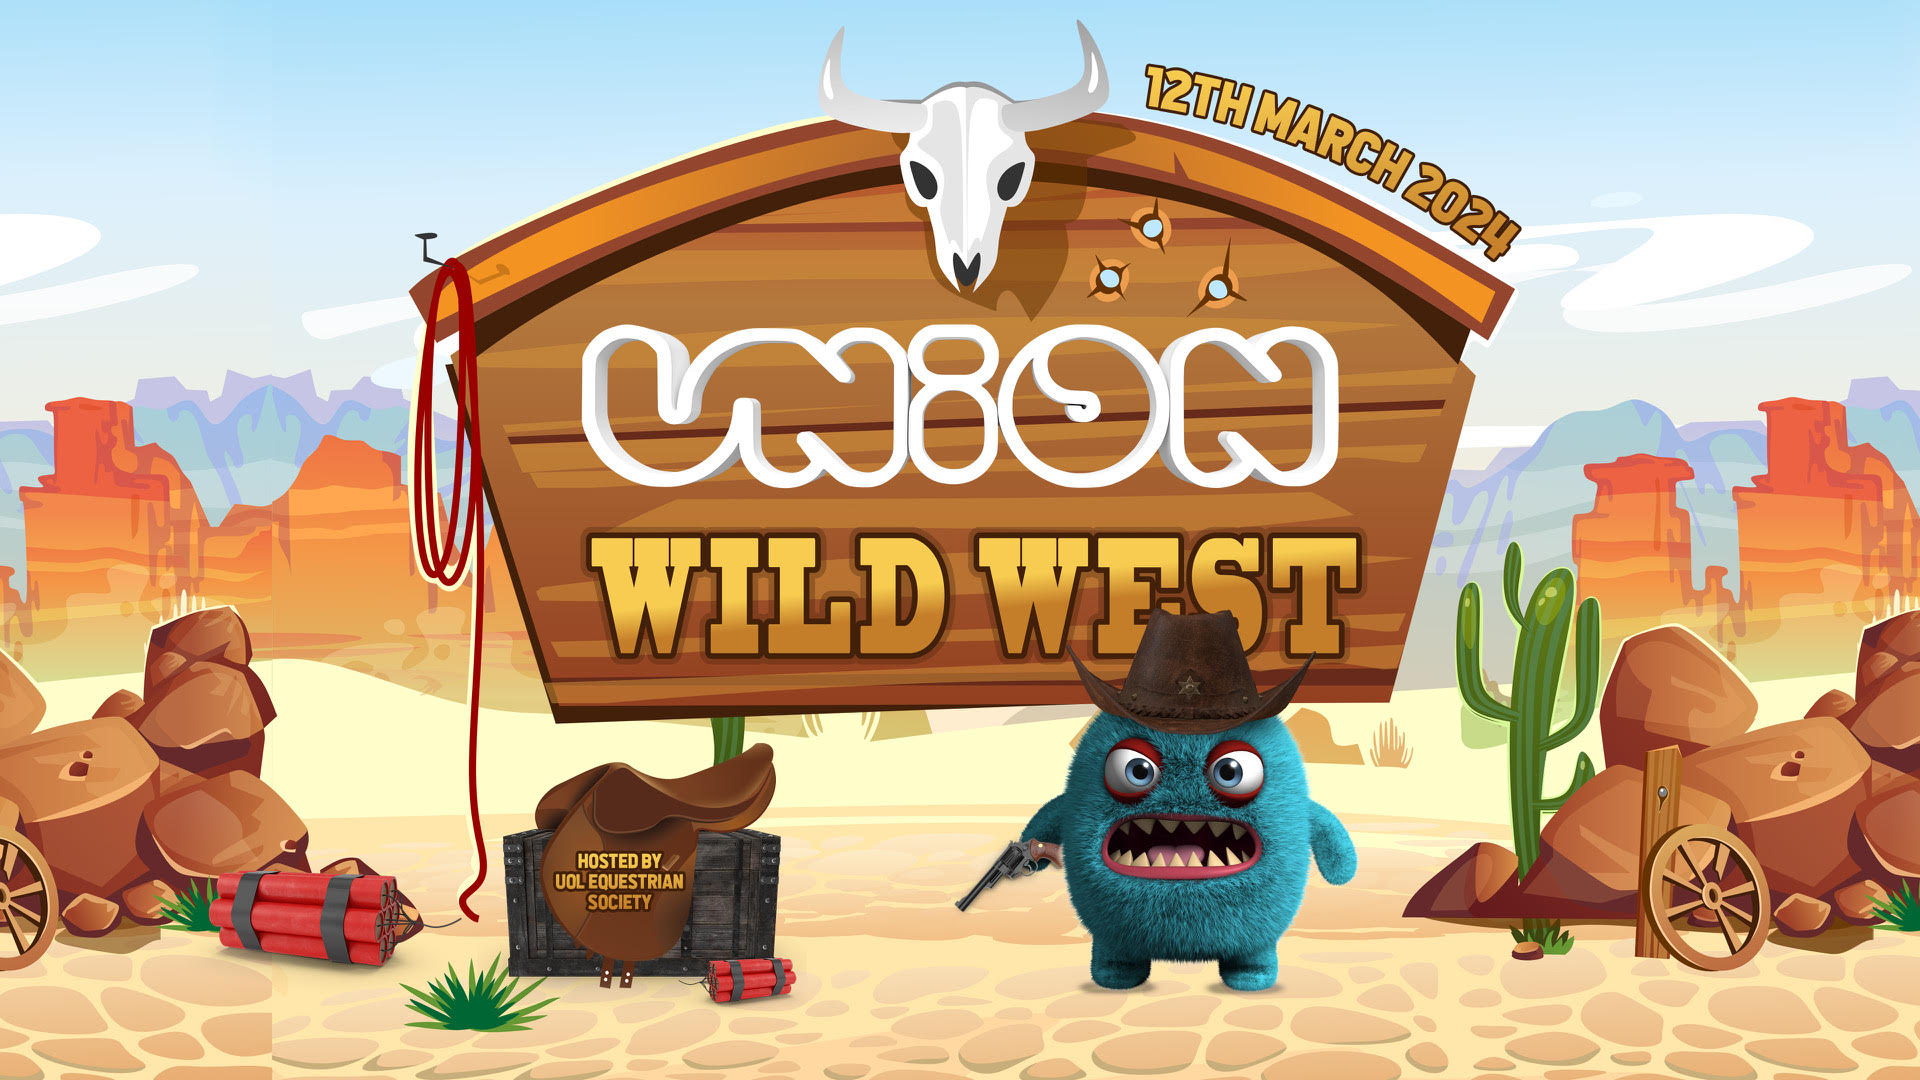 UNION TUESDAY’S // WILD WEST // Hosted by UoL Equestrian Society